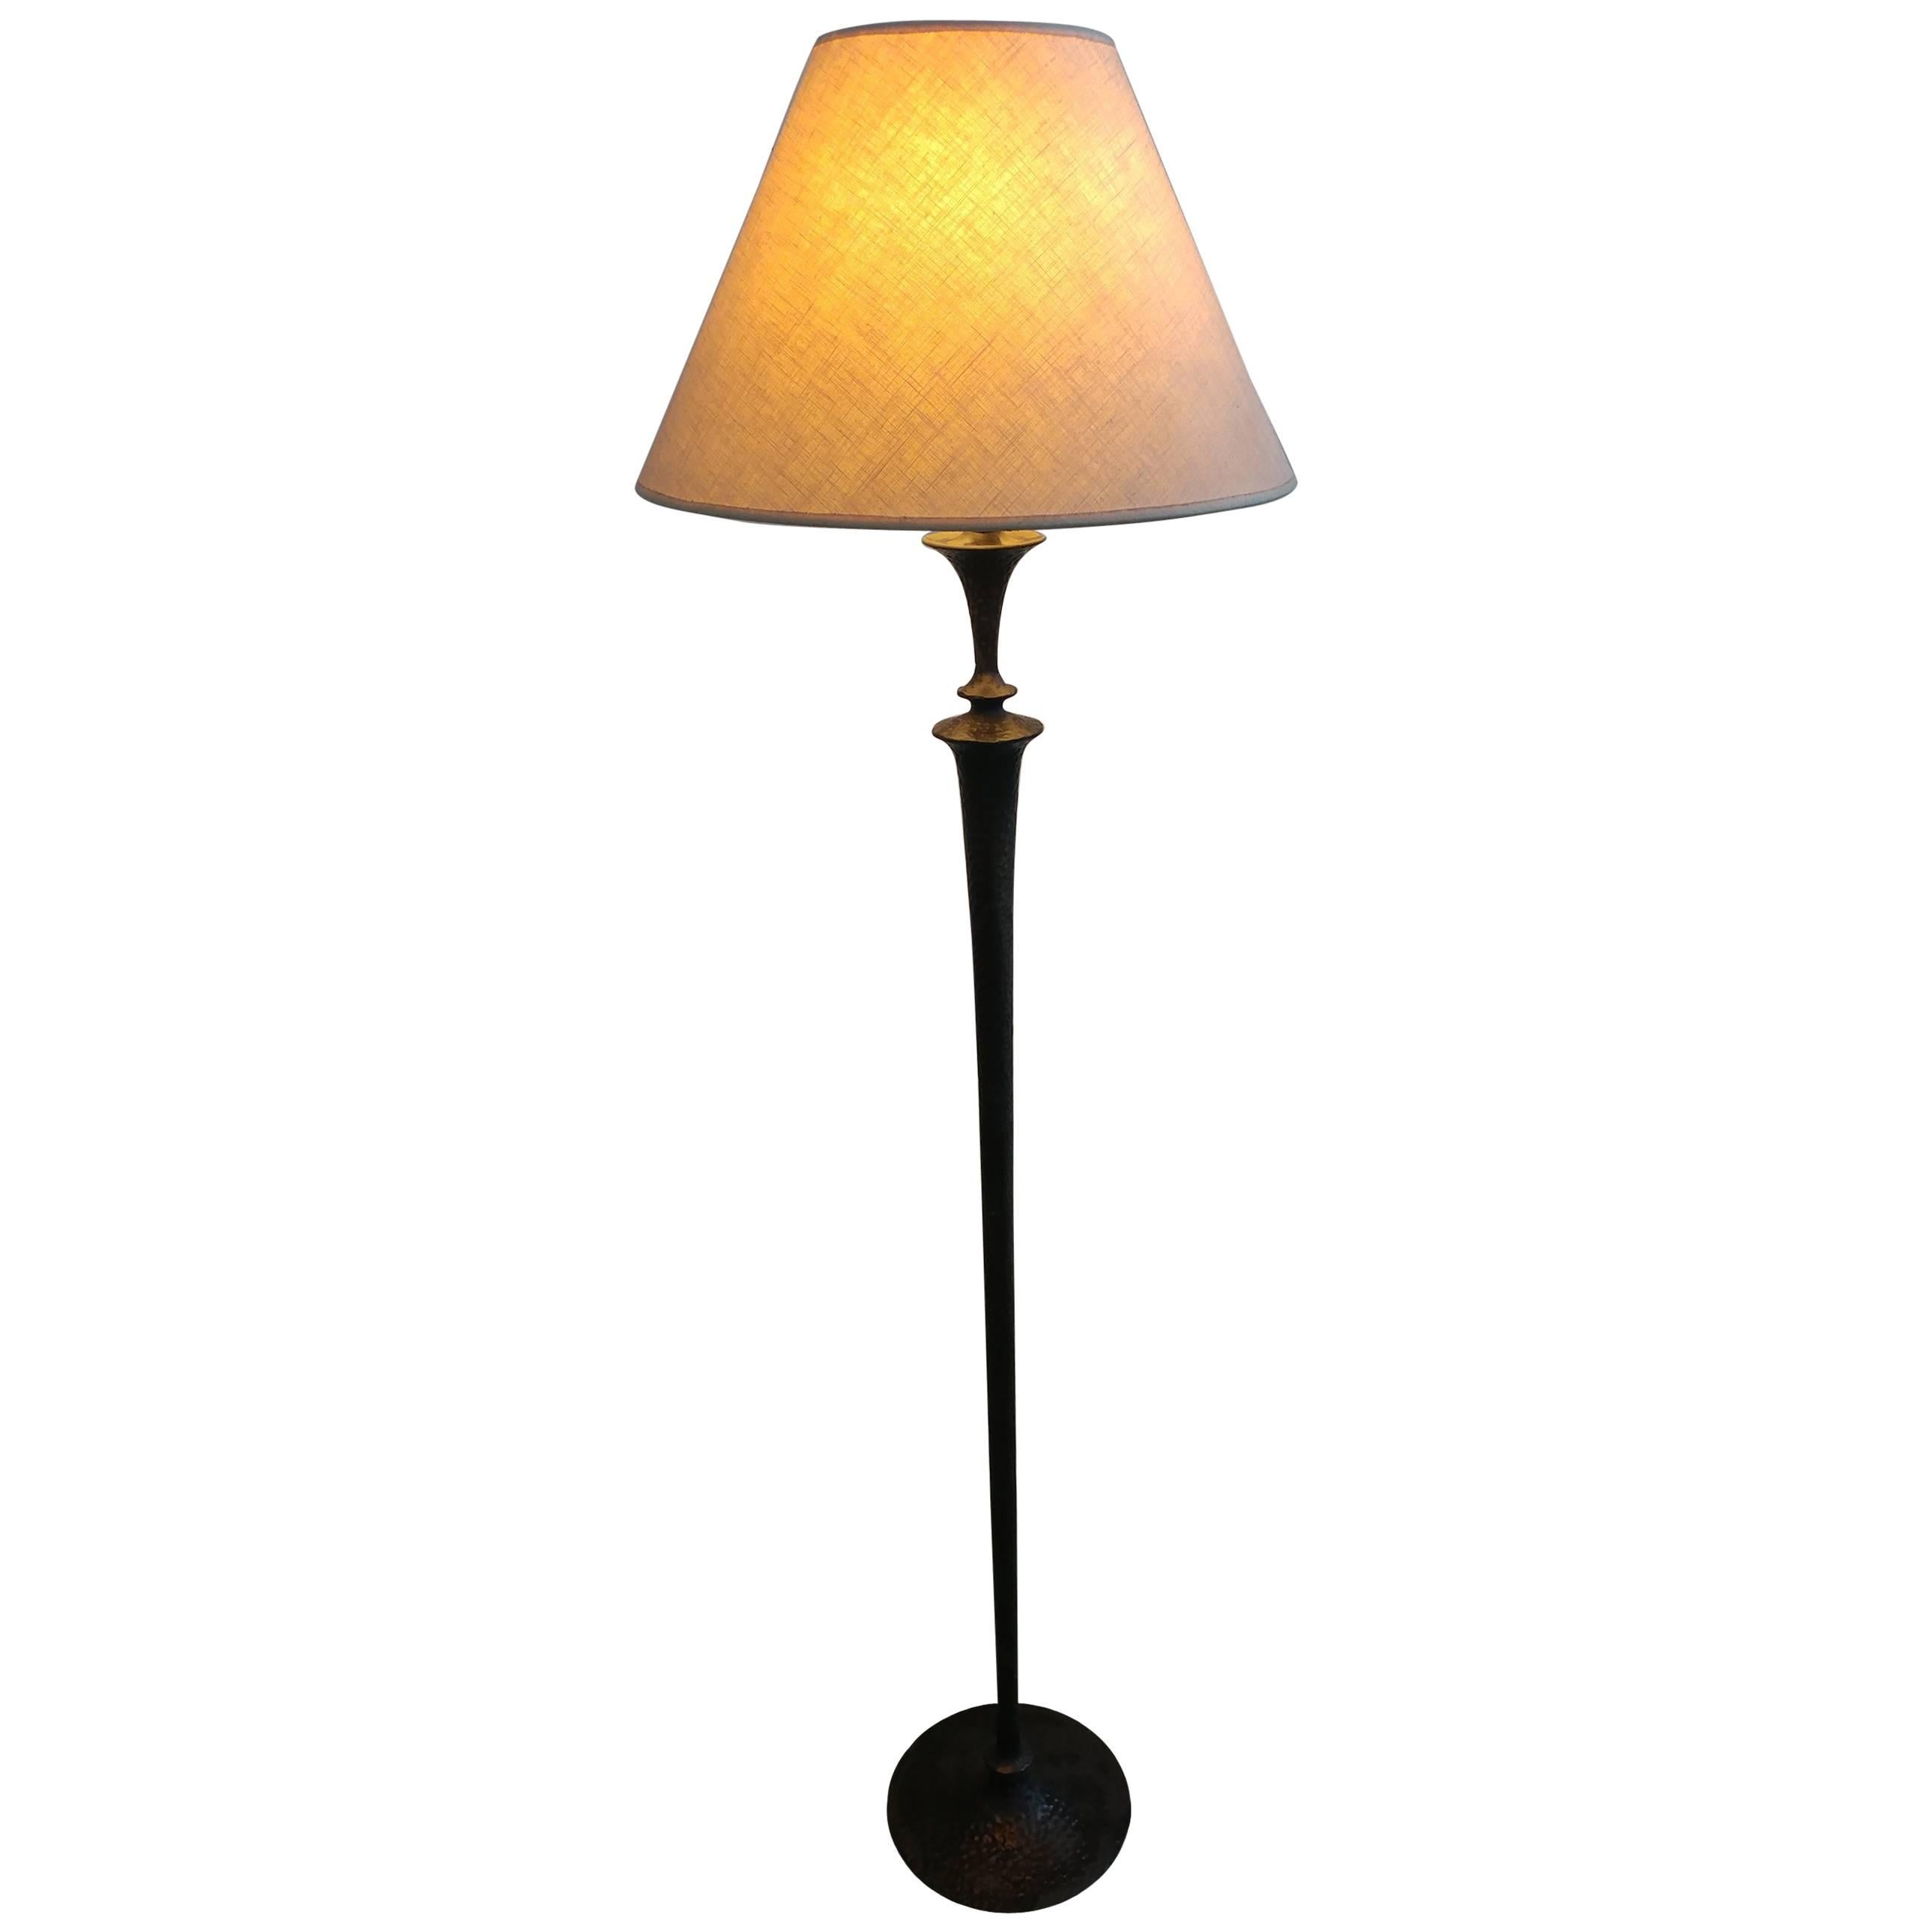 Giacometti Style Hammered Painted Bronze Floor Lamp Offered by LaPorte